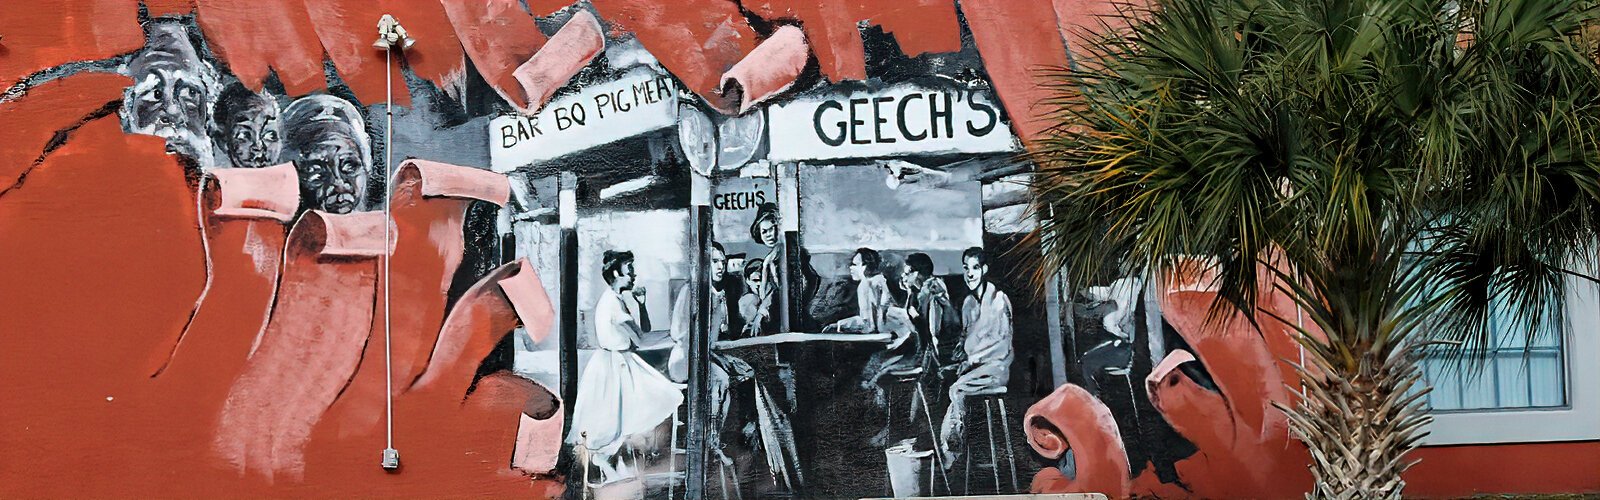 One can almost smell the aroma of smoked barbecue from Geech’s, a popular restaurant from the segregation era depicted in this historical mural along 22nd Street South.